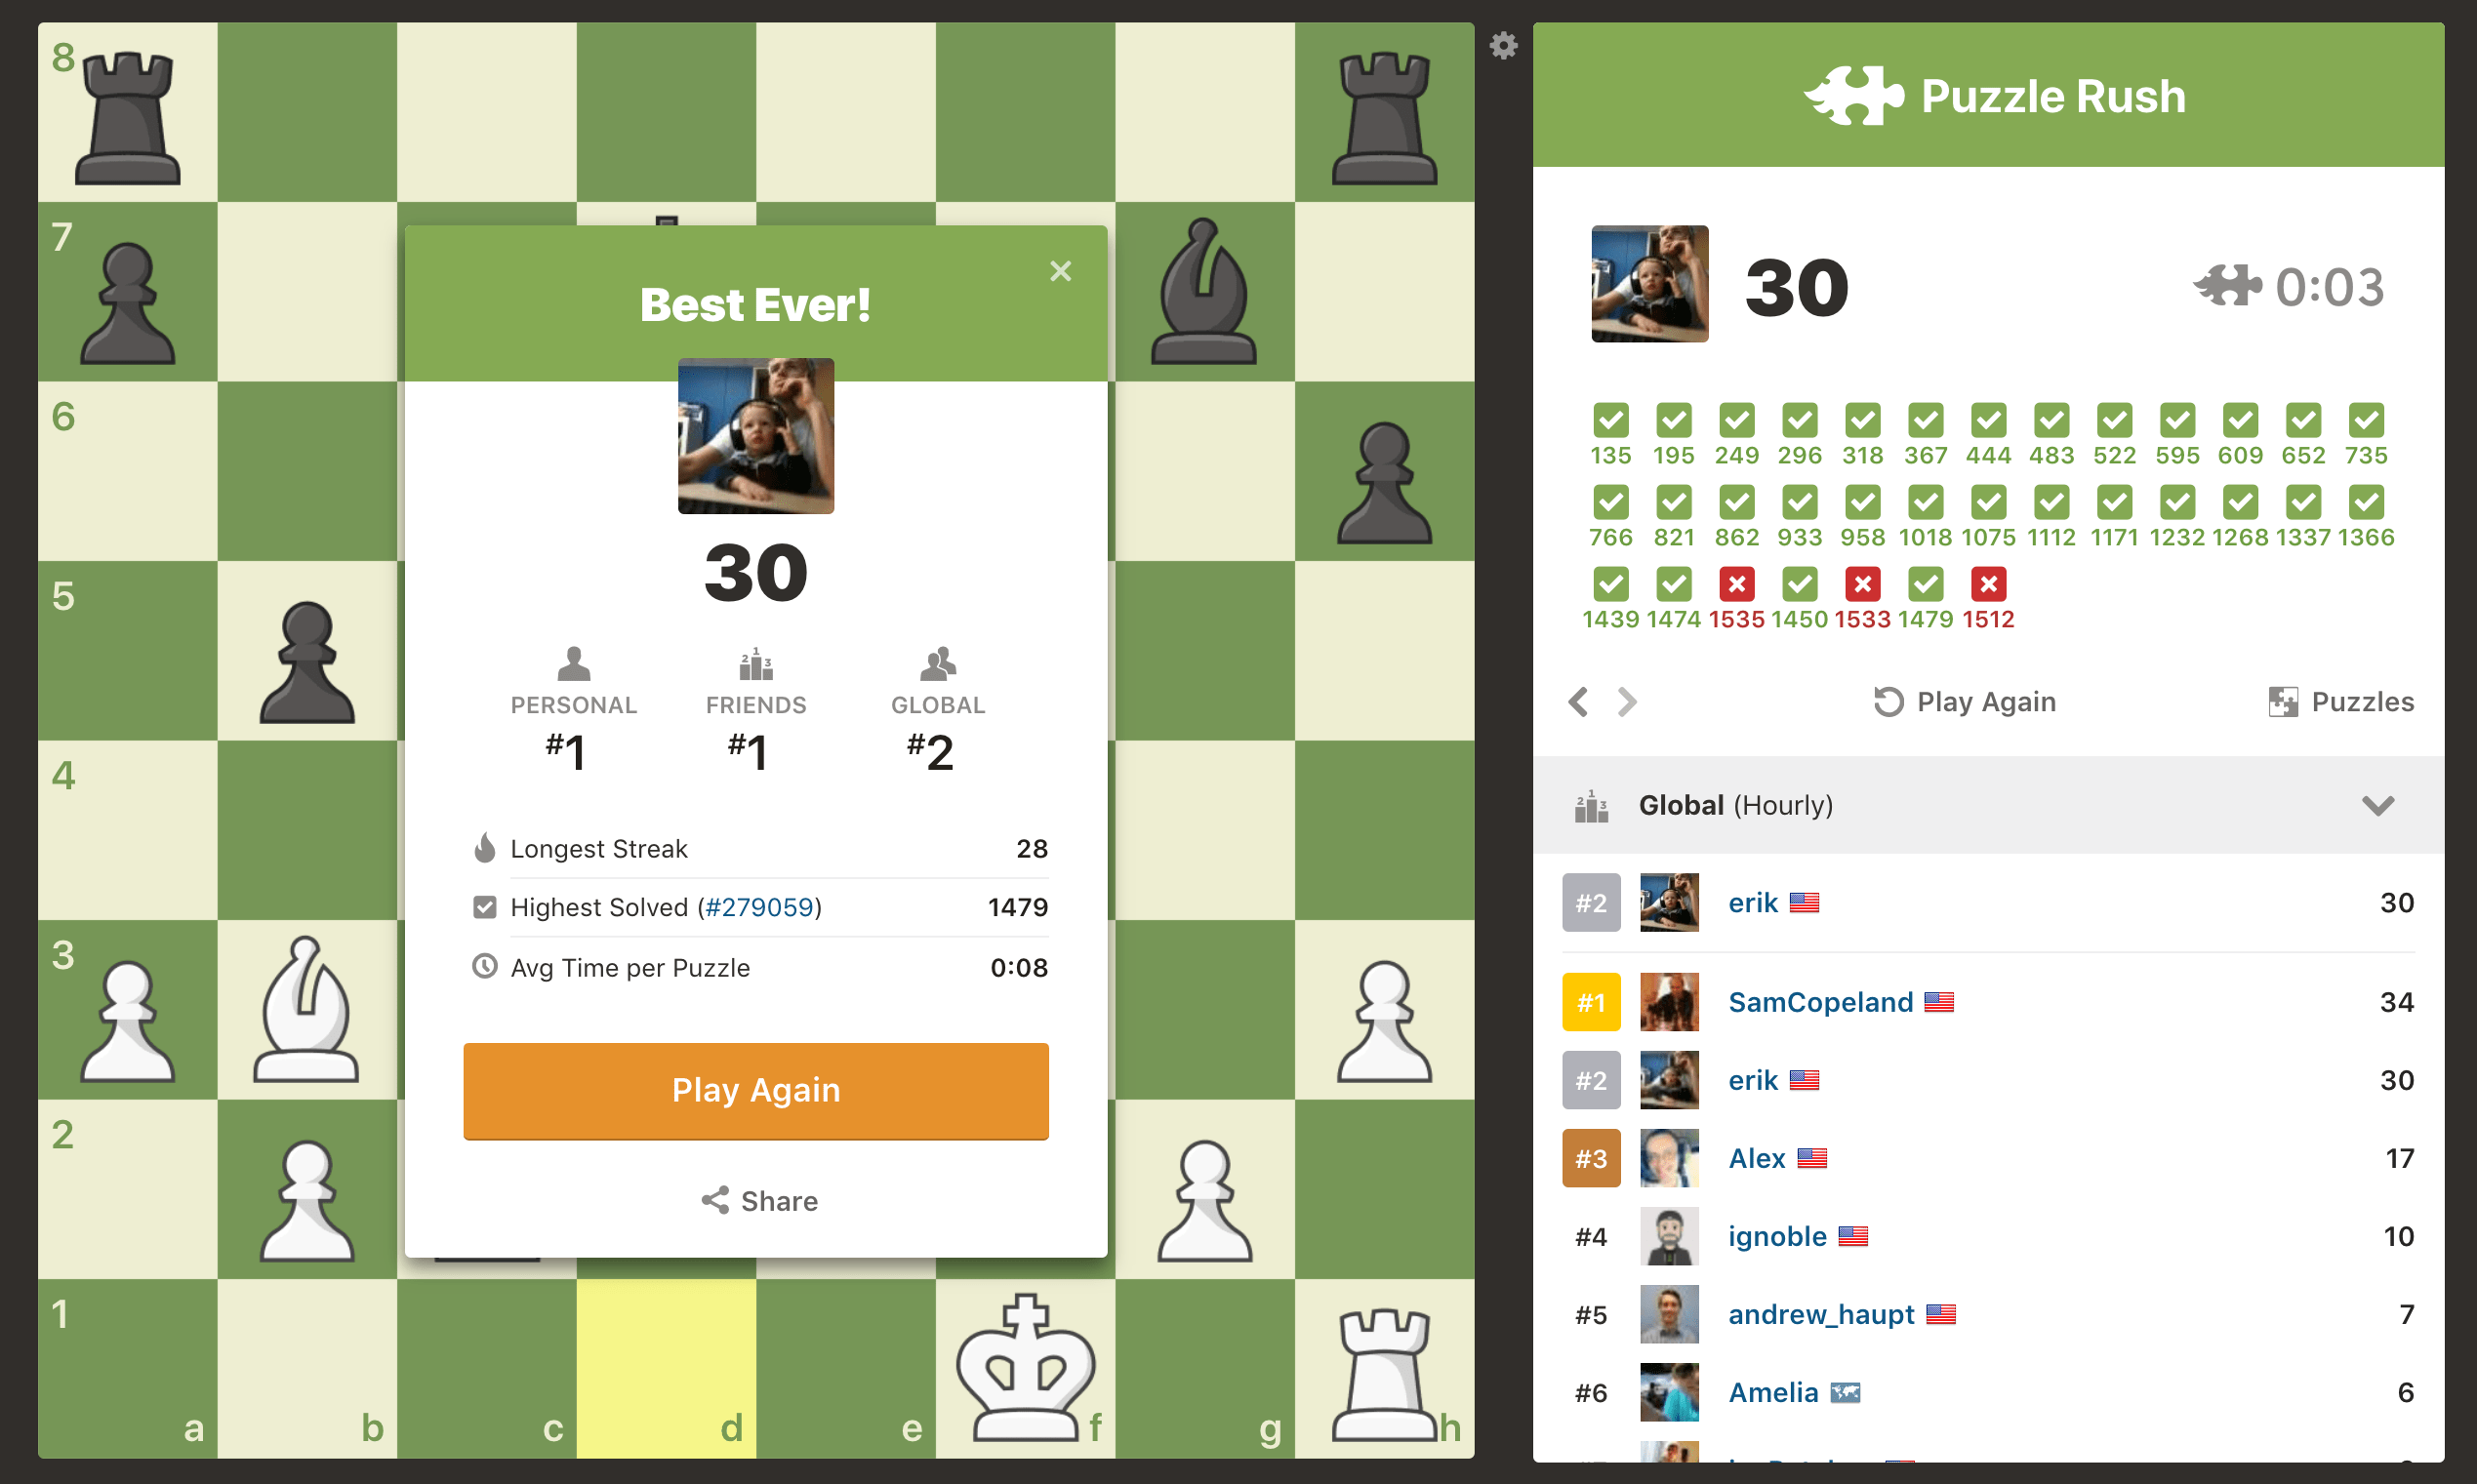 What is your highest score on Chess.com's puzzle rush and how well